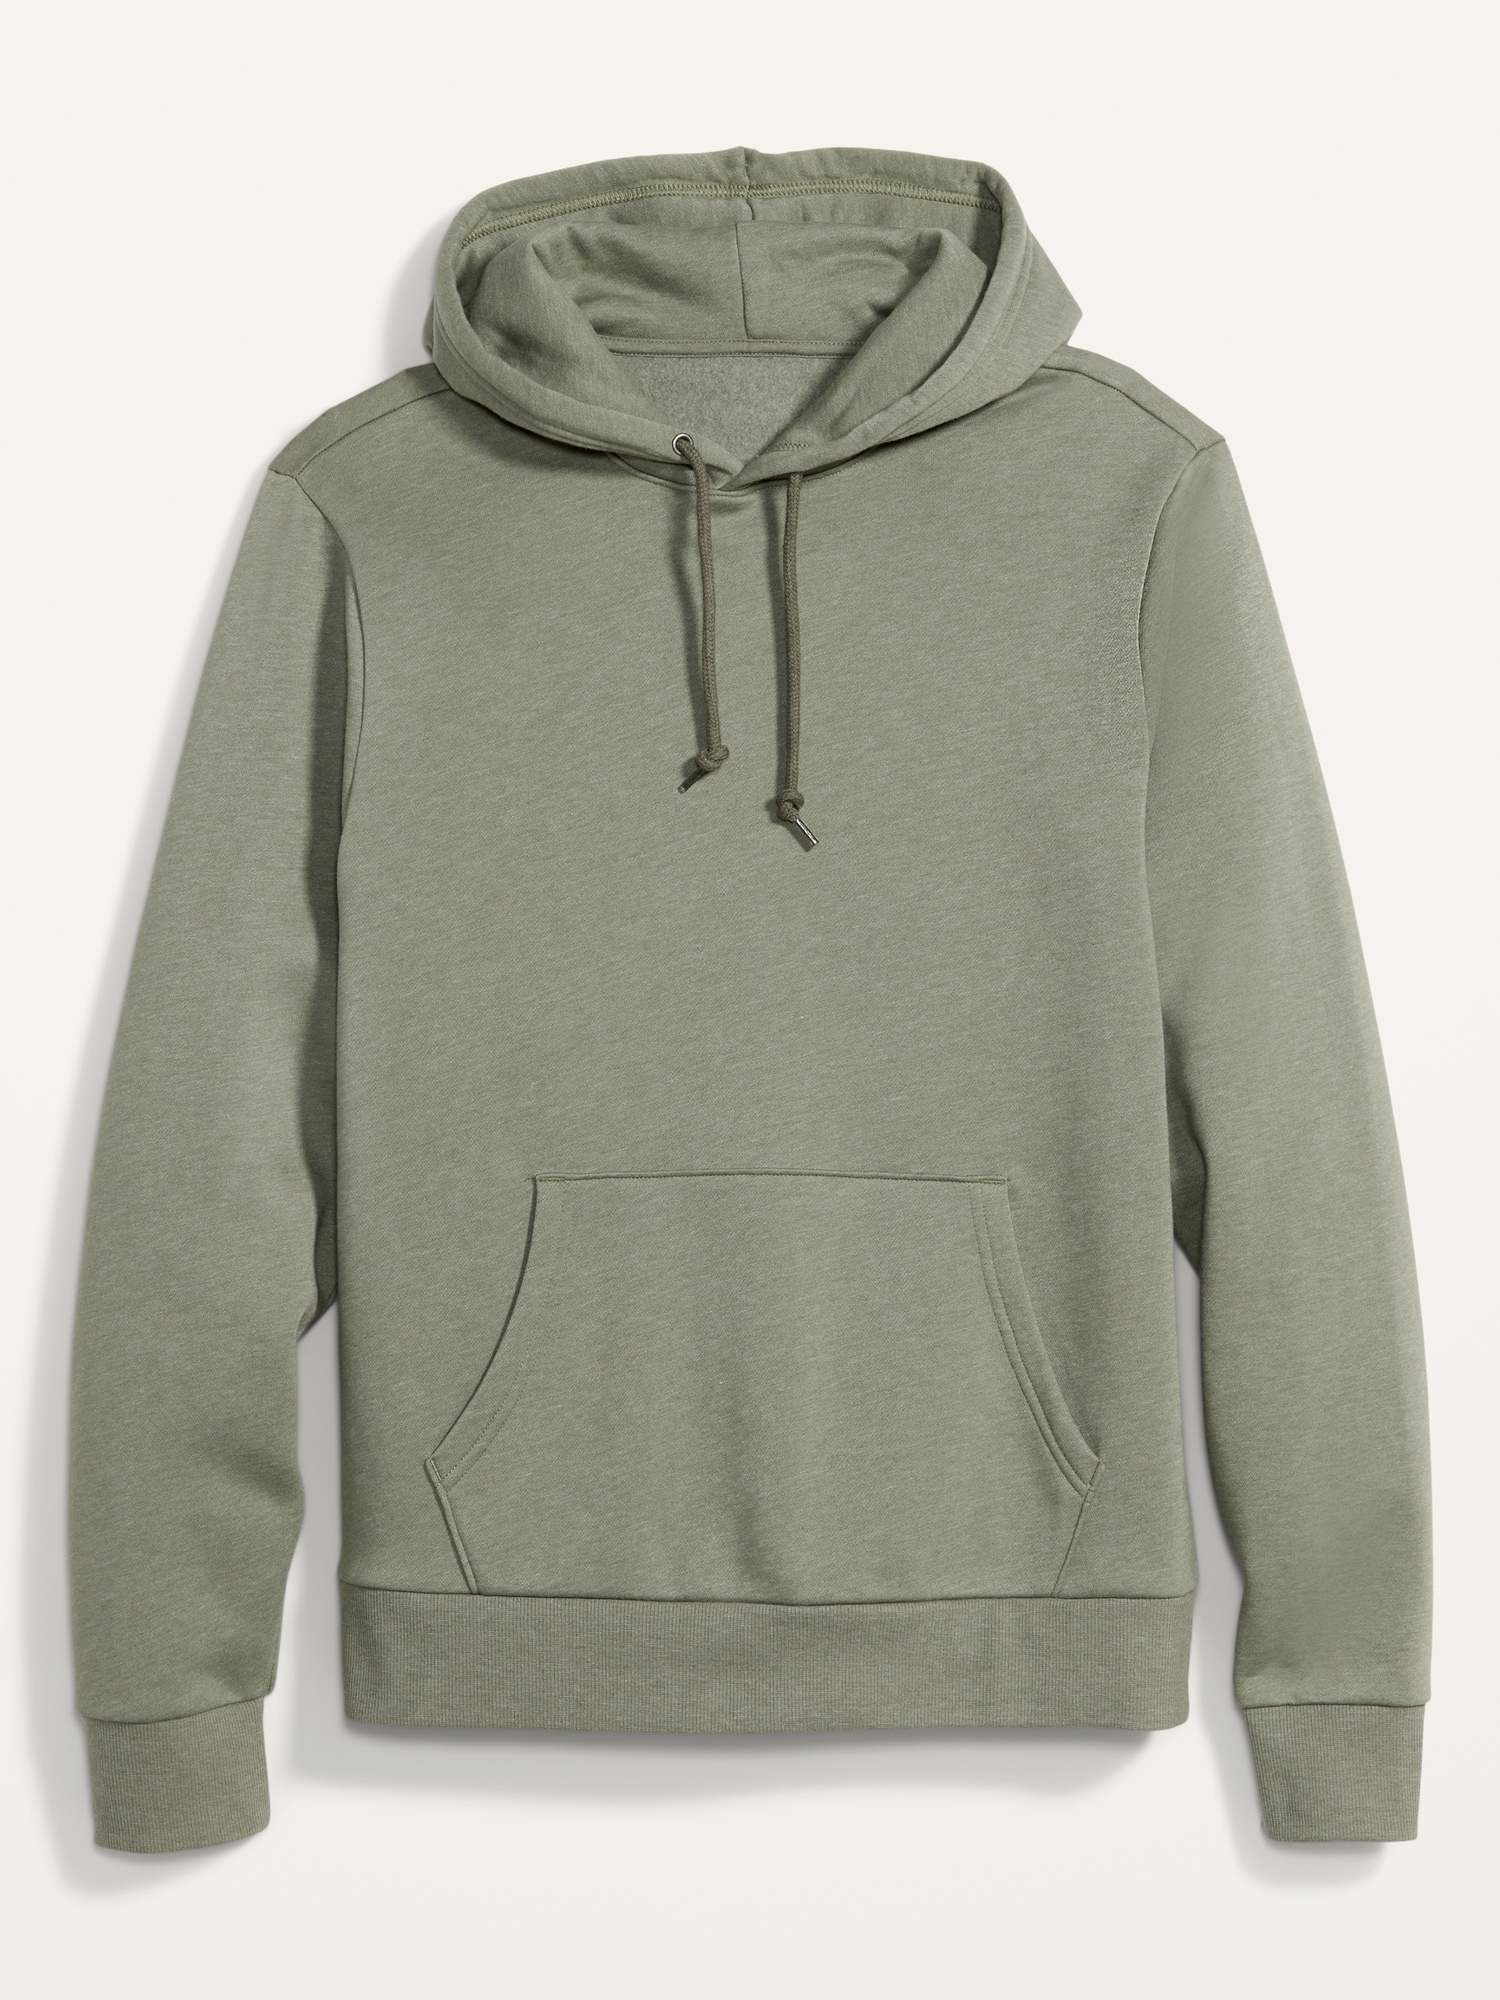 Gender-Neutral Solid-Color Pullover Hoodie for Adults | Old Navy